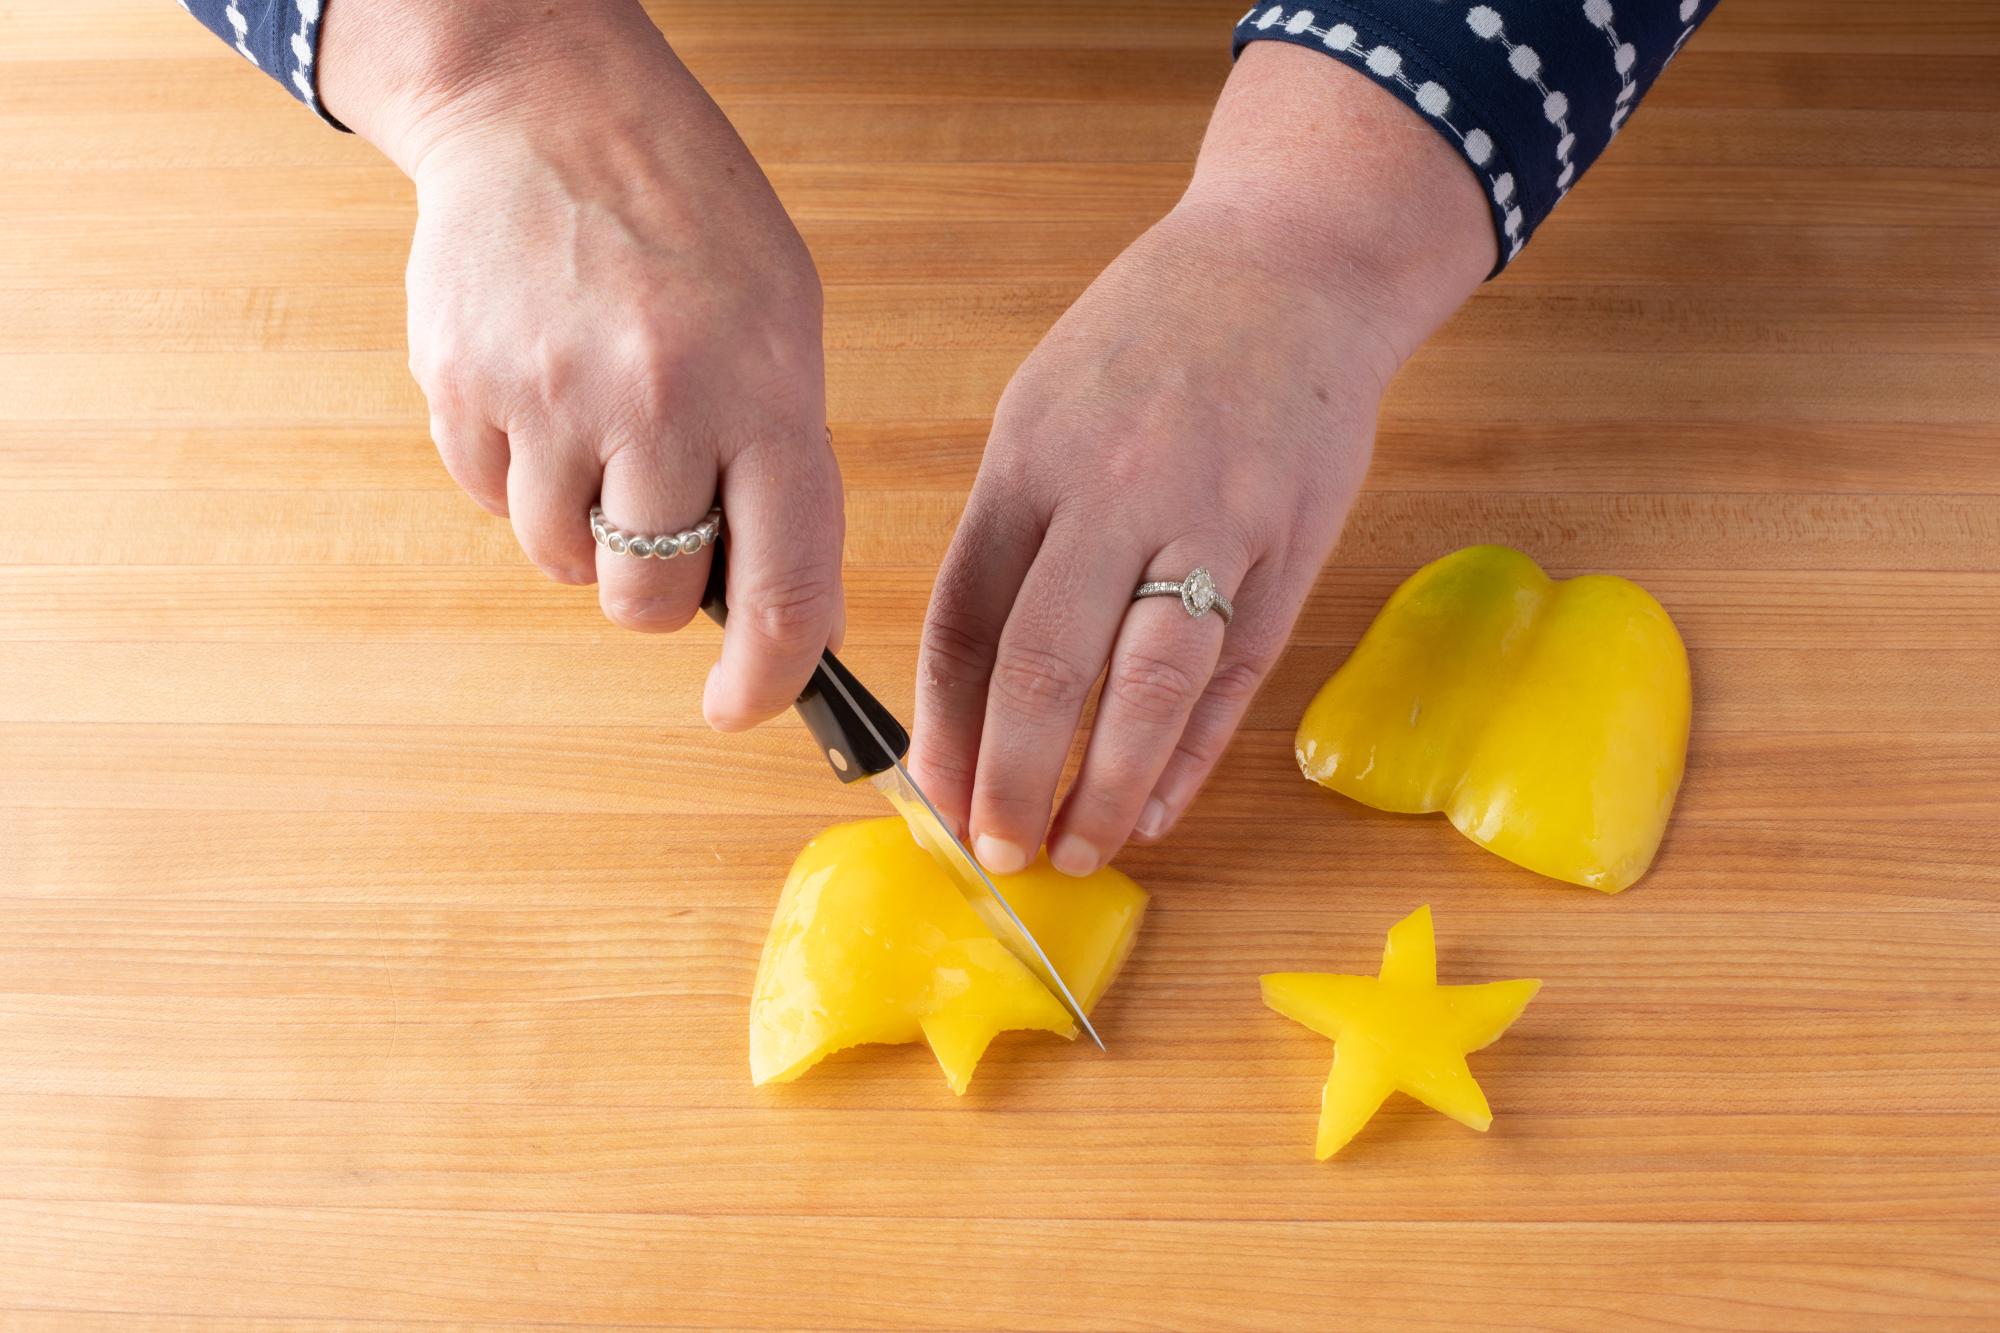 Cutting a star out of the yellow bell pepper with a Paring Knife.